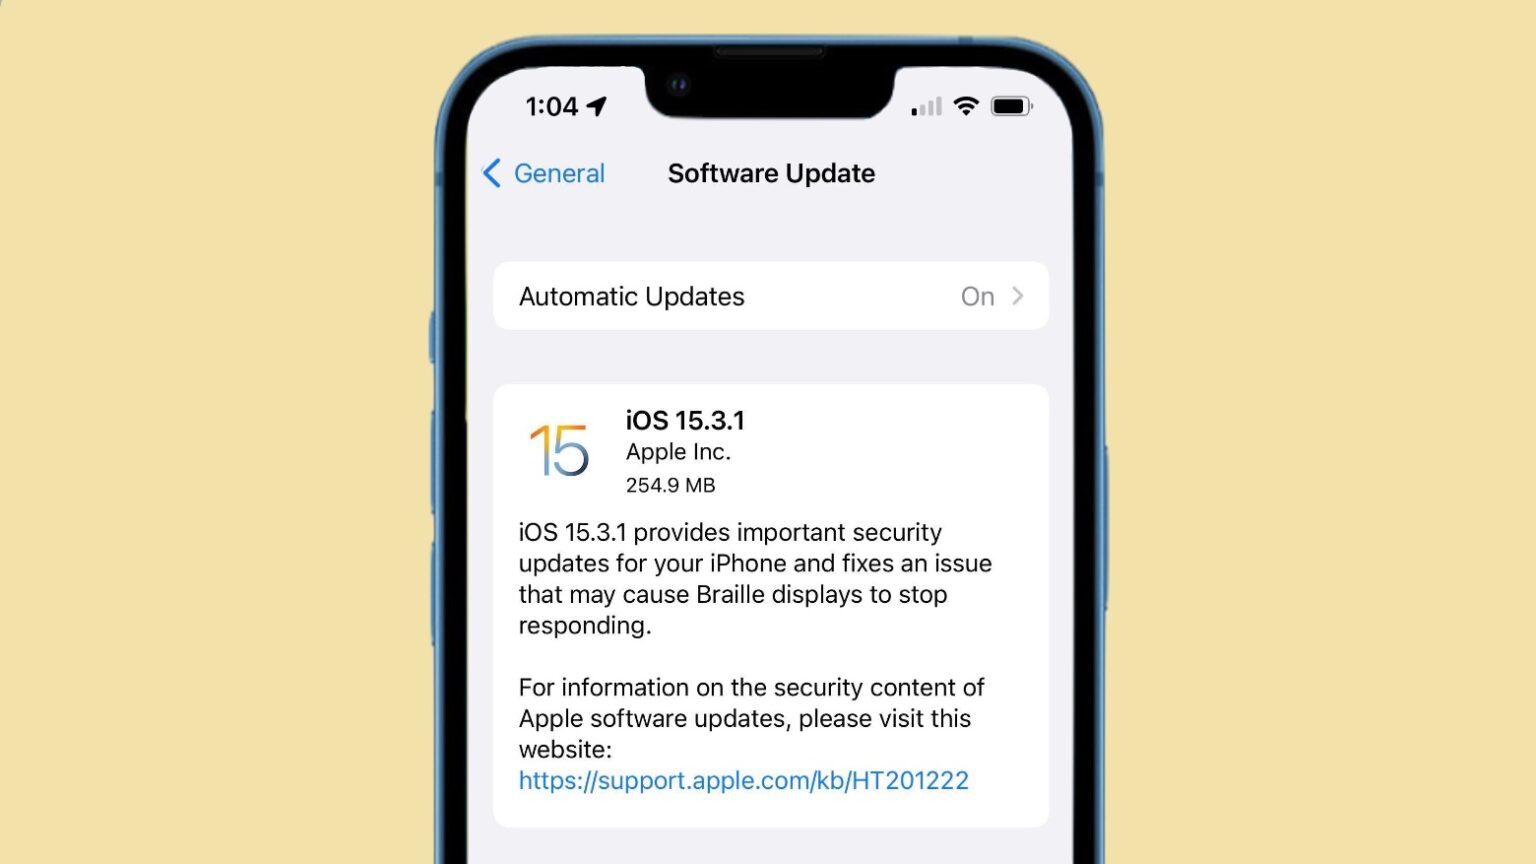 iOS 15.3.1 closes risky security hole and fixes Braille display bug